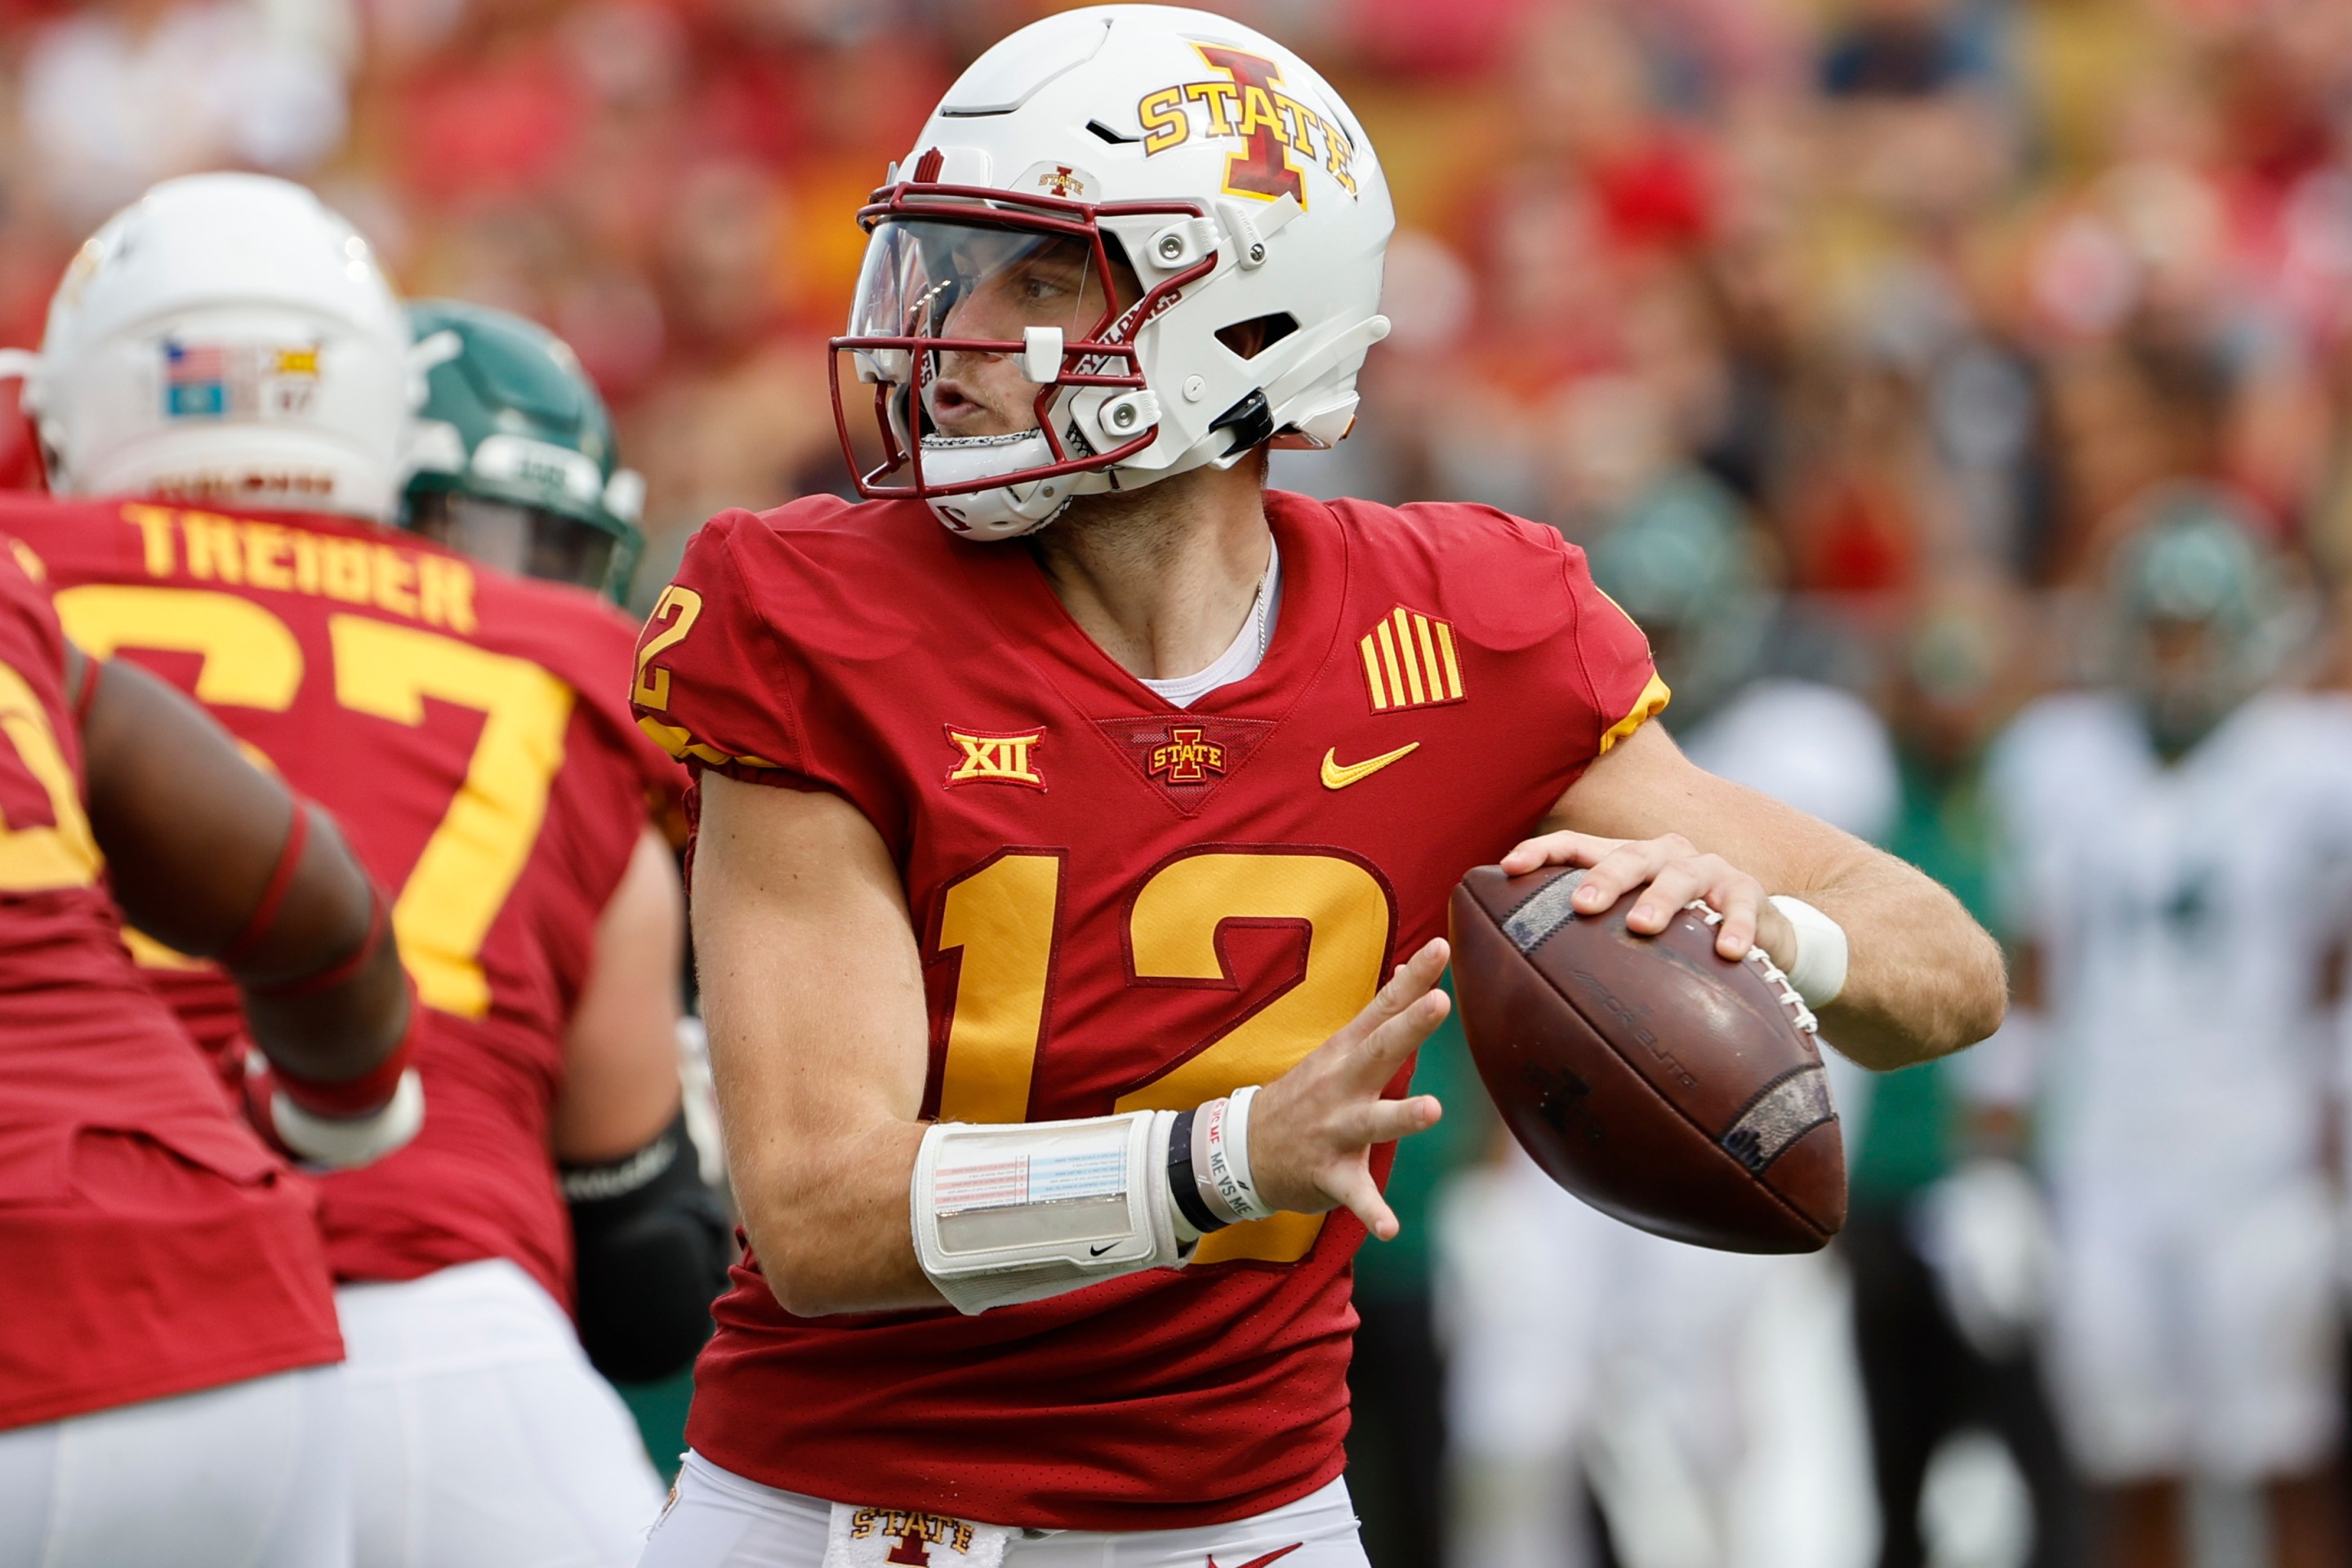 Quarterback Hunter Dekkers #12 of the Iowa State Cyclones throws the ball in the second half of play at Jack Trice Stadium on September 24, 2022 in Ames, Iowa. The Baylor Bears won 31-24 over the Iowa State Cyclones.